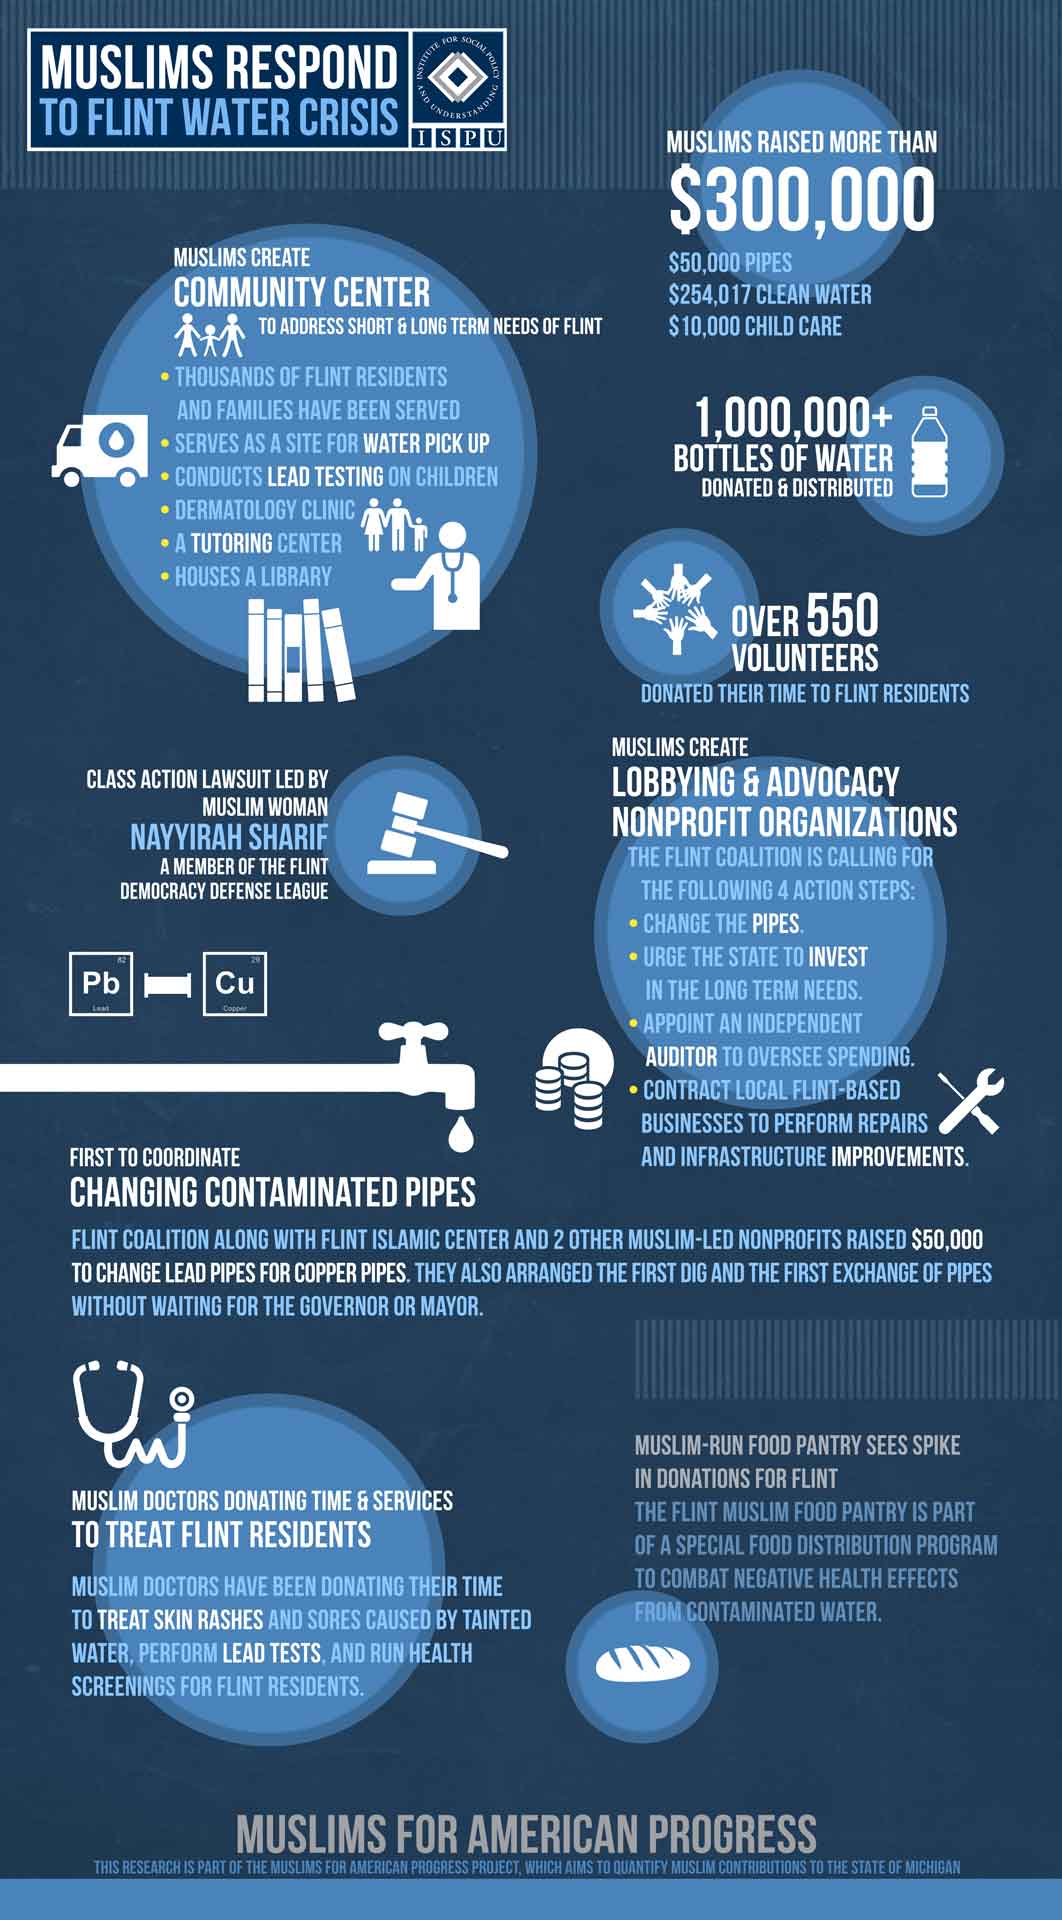 Infographic showing how Muslims responded to the Flint water crisis. Muslims raised more than $300,000. Muslims created a community center to address short and long term needs of Flint. A Muslim woman and member of the Flint Democracy Defense League, Nayyirah Sharif, led a class action lawsuit. Over 550 Muslim volunteers donated their time to Flint residents. Over 1,000,000 bottles of water were donated and distributed by Muslims. Muslim doctors donated their time and services to treat Flint residents. Muslim-run food pantry saw a spike in donations for Flint.